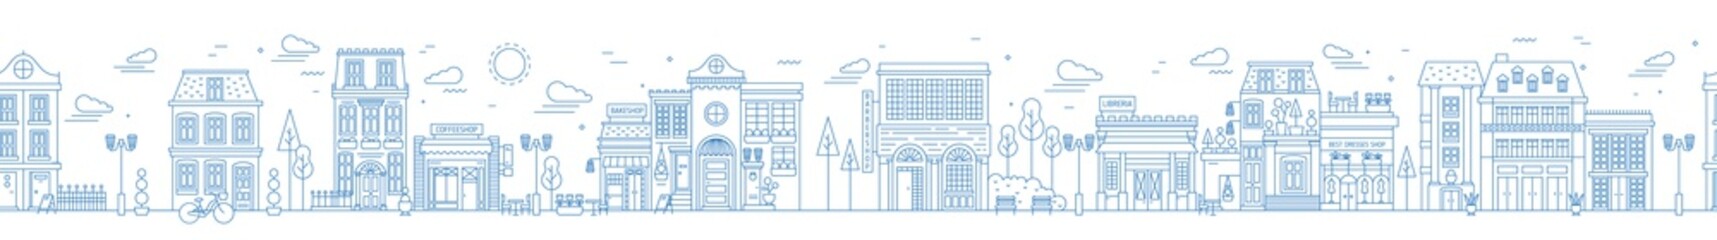 Fototapete - Monochrome seamless urban landscape with city street or district. Cityscape with residential houses and shops drawn with contour lines on white background. Vector illustration in lineart style.